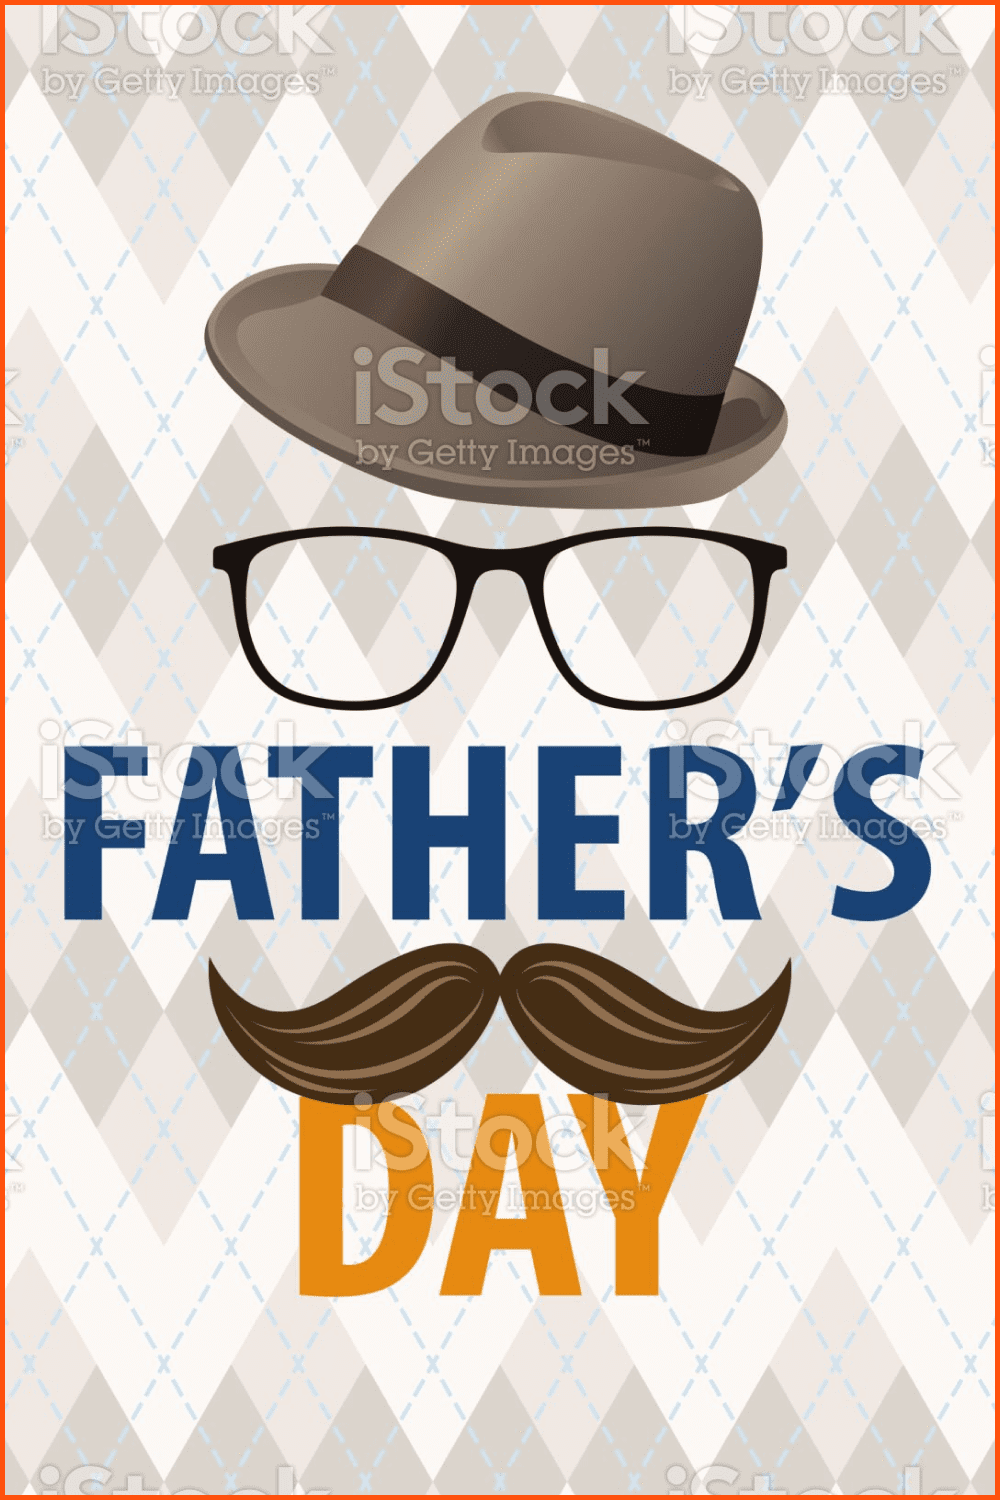 Father’s Day Thanks Dad stock illustration.